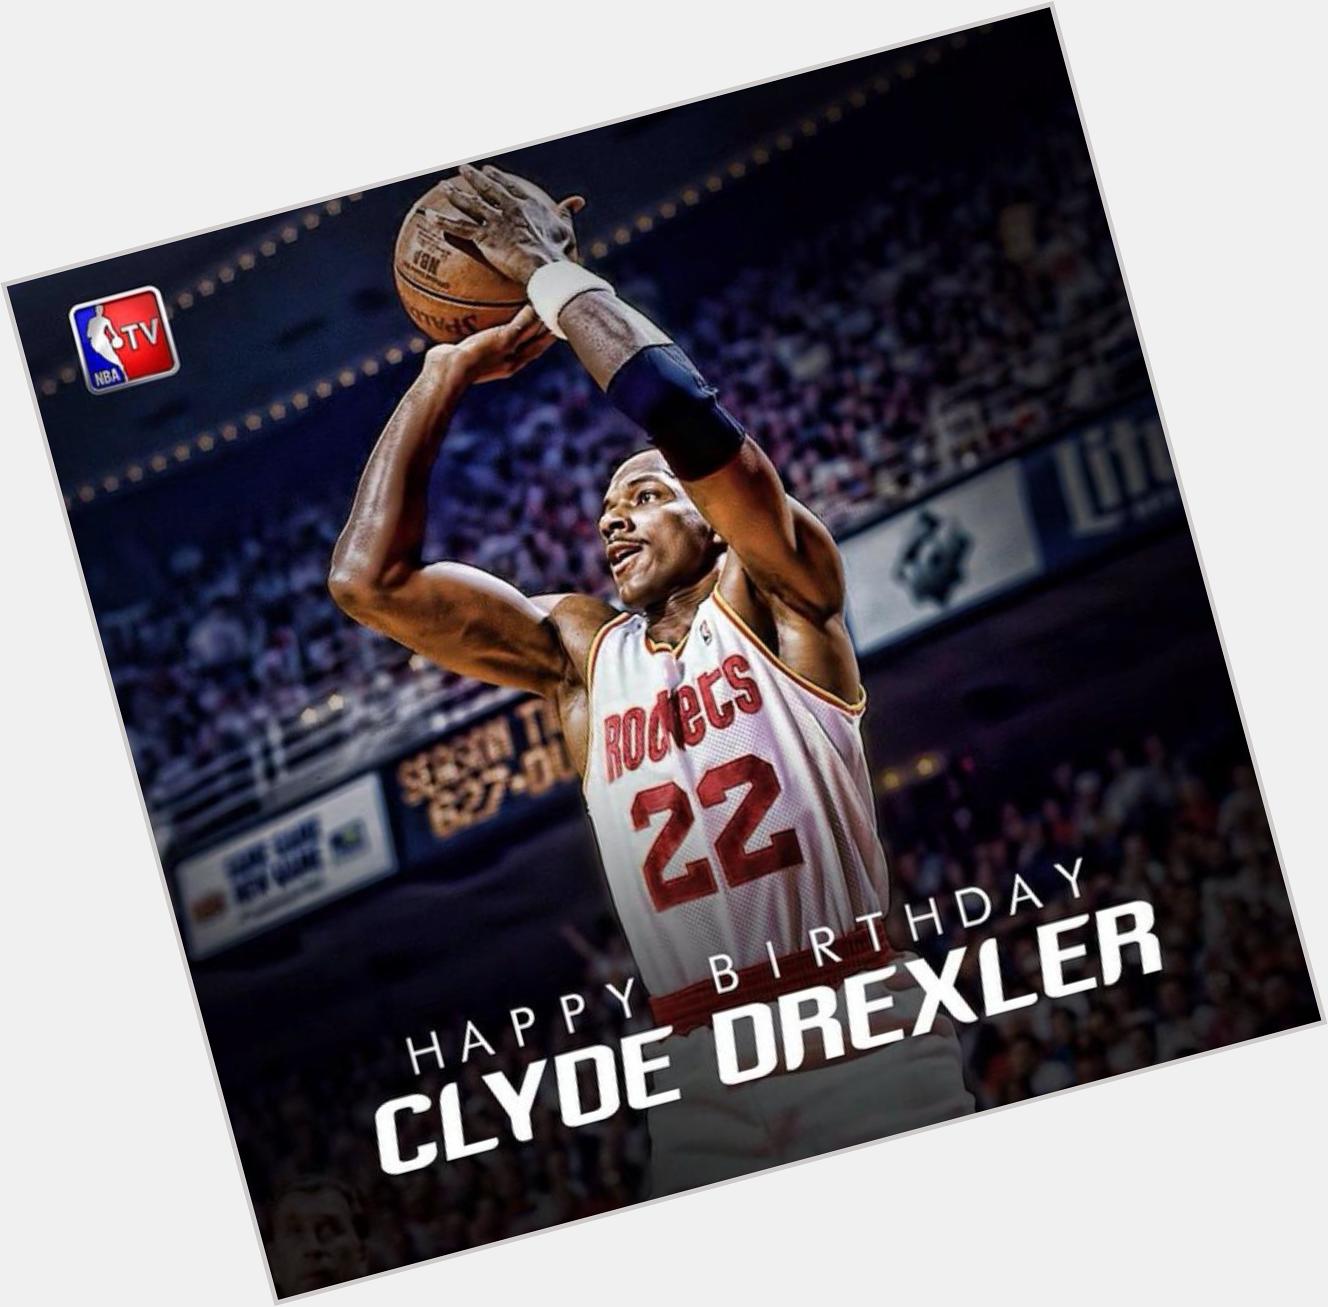 Happy Birthday to 10-time NBA All Star and NBA Champion Clyde Drexler 